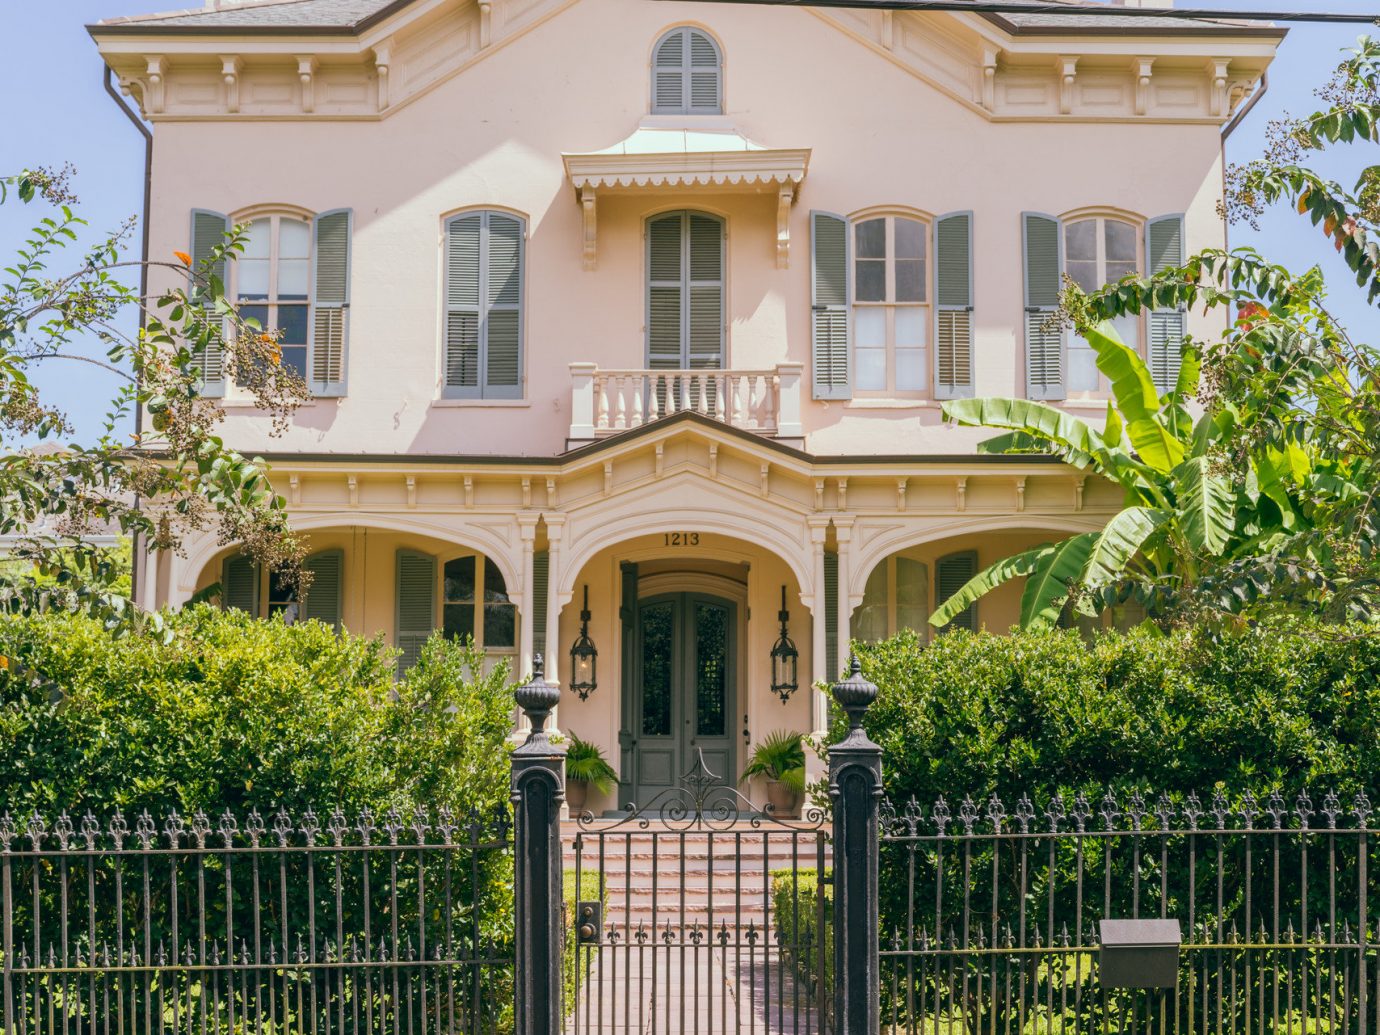 Historic house in New Orleans Louisiana